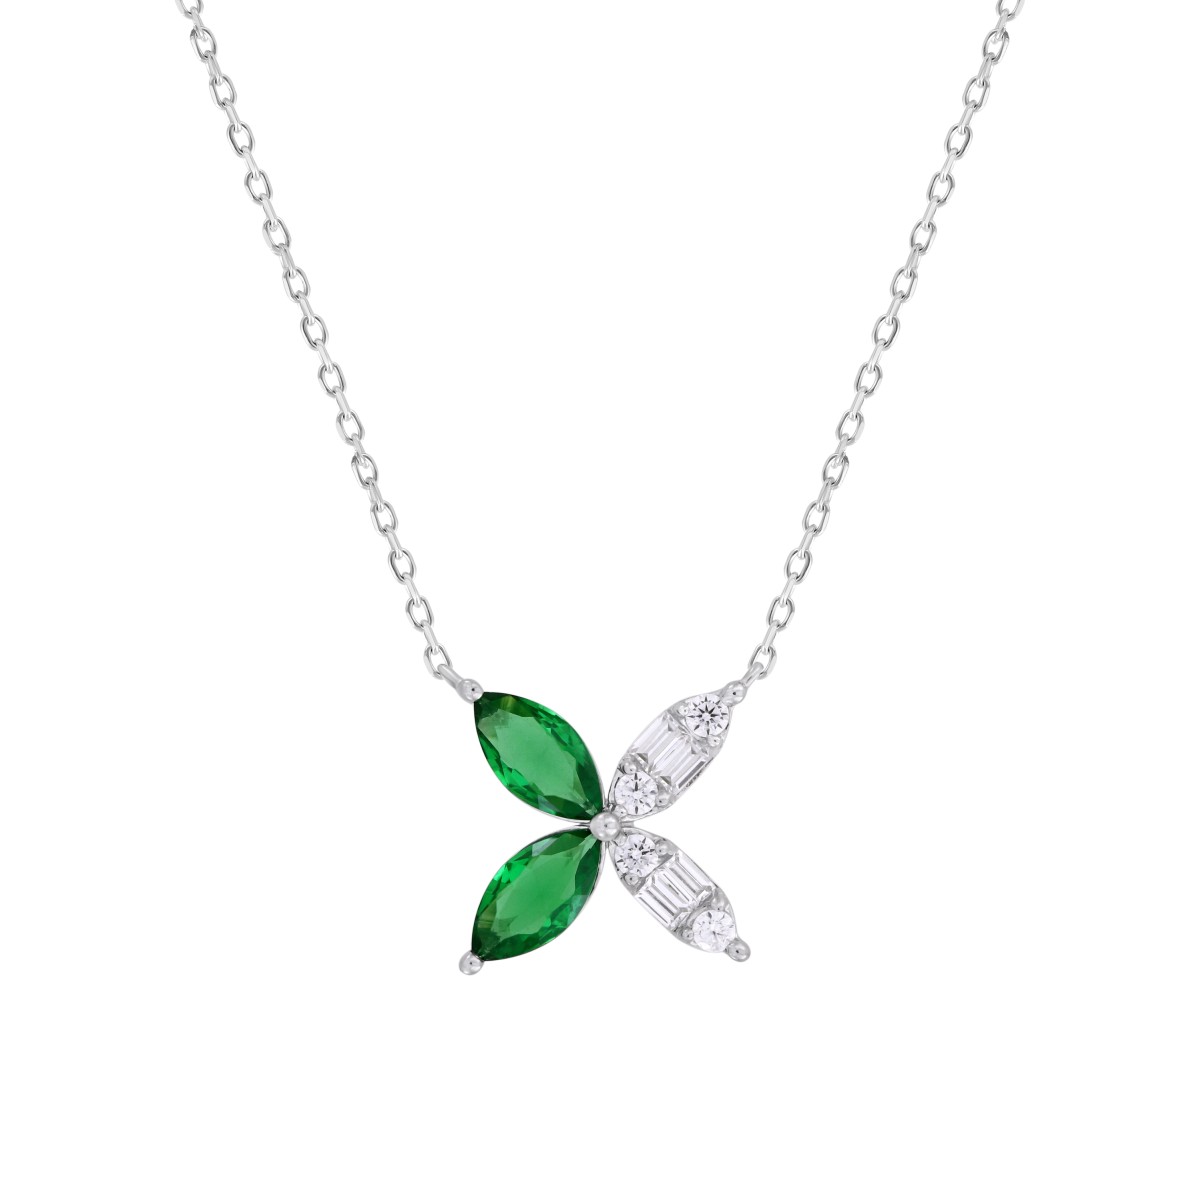 18K WHITE GOLD 1 3/4CT ROUND/BAGUETTE/MARQUISE DIAMOND LADIES PENDANT WITH CHAIN(COLOR STONE MARQUISE GREEN EMERALD DIAMOND 1 5/8CT)